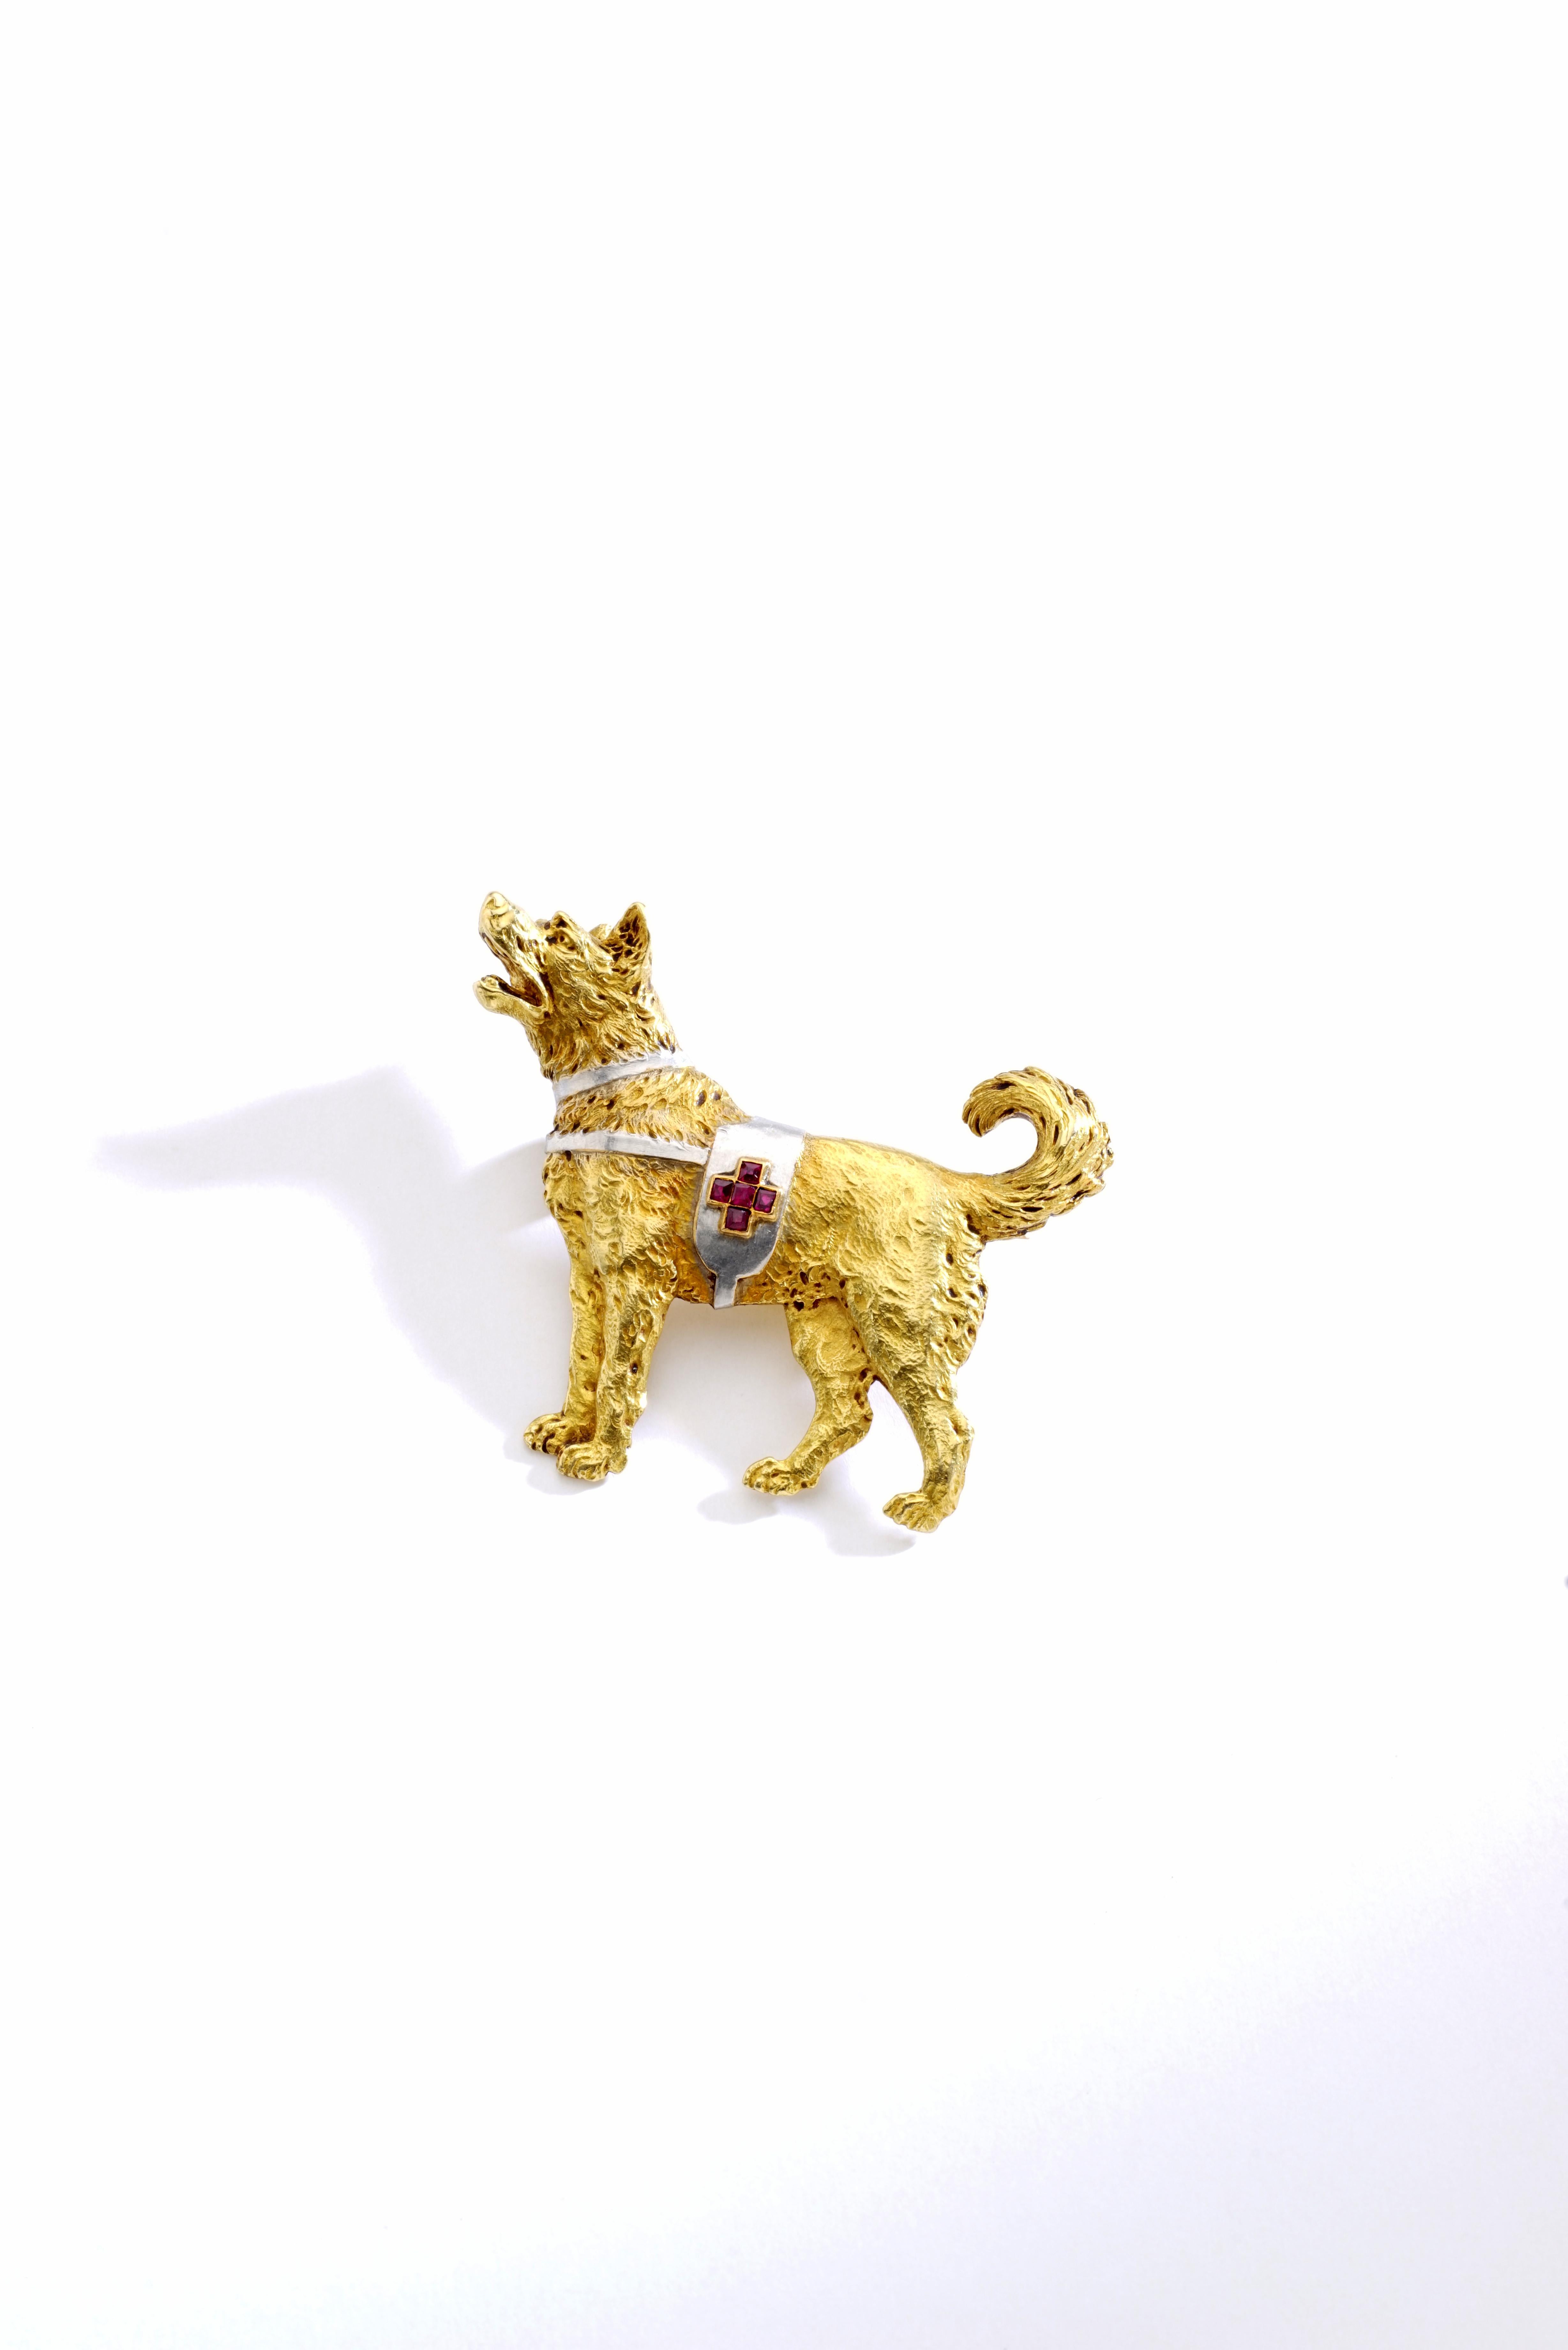 Swiss cross Rescue Dog. Ruby, Gold and Platinum Brooch.
Circa 1970. French marks.

Total length: 1.77 inch (4.50 centimeters).
Total height: 1.50 inch (3.80 centimeters).